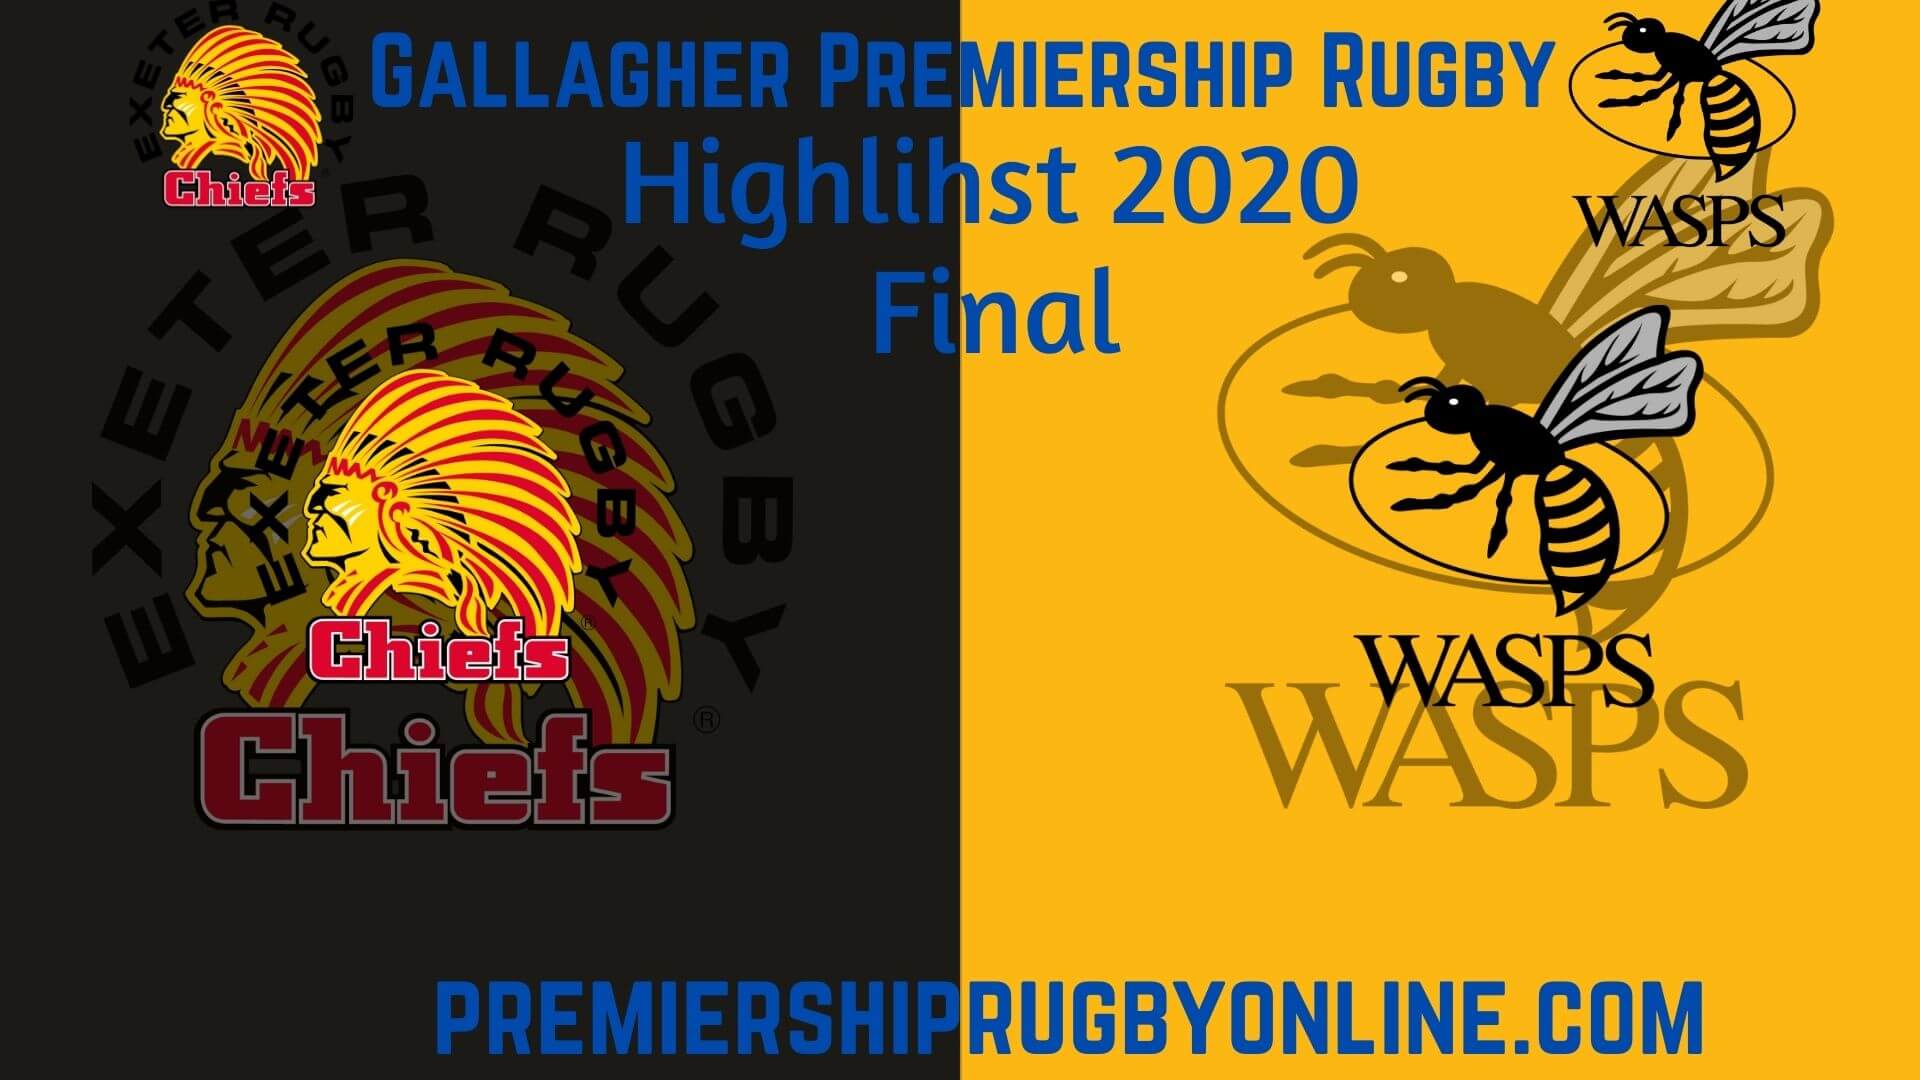 Exeter Chiefs vs Wasps Highlights 2020 Final